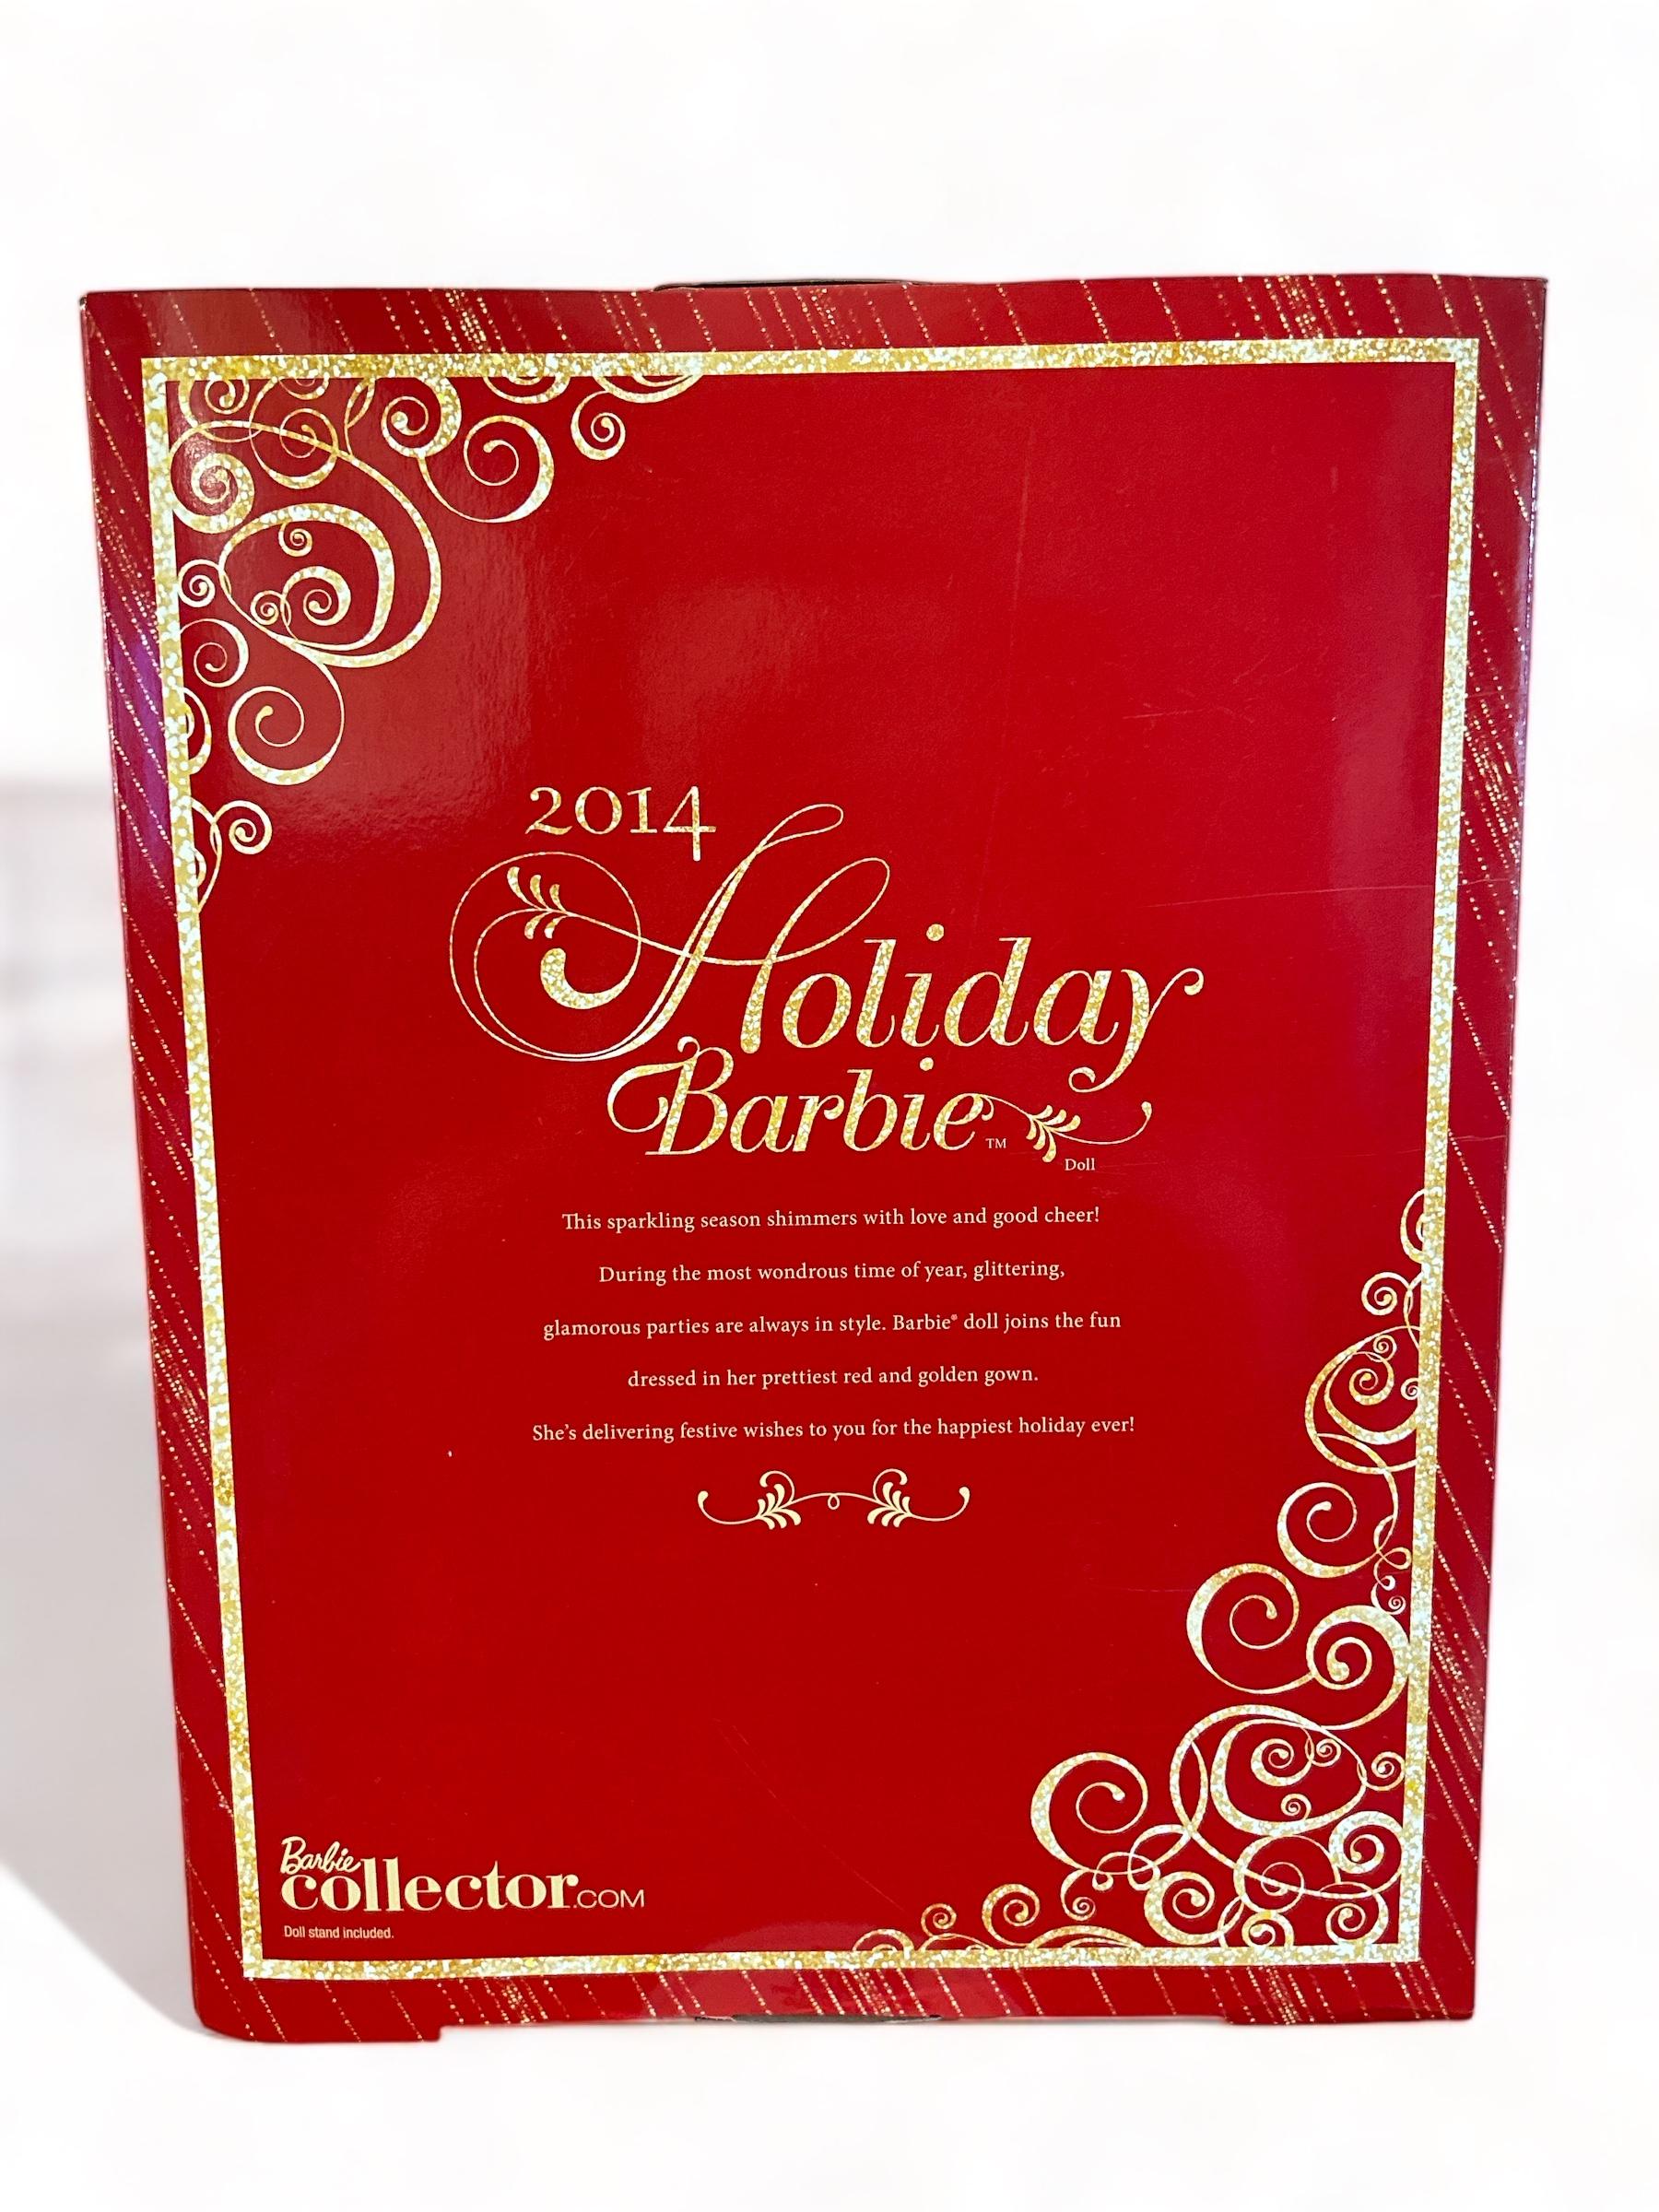 2014 Holiday African American Barbie - Barbie Collector's Edition